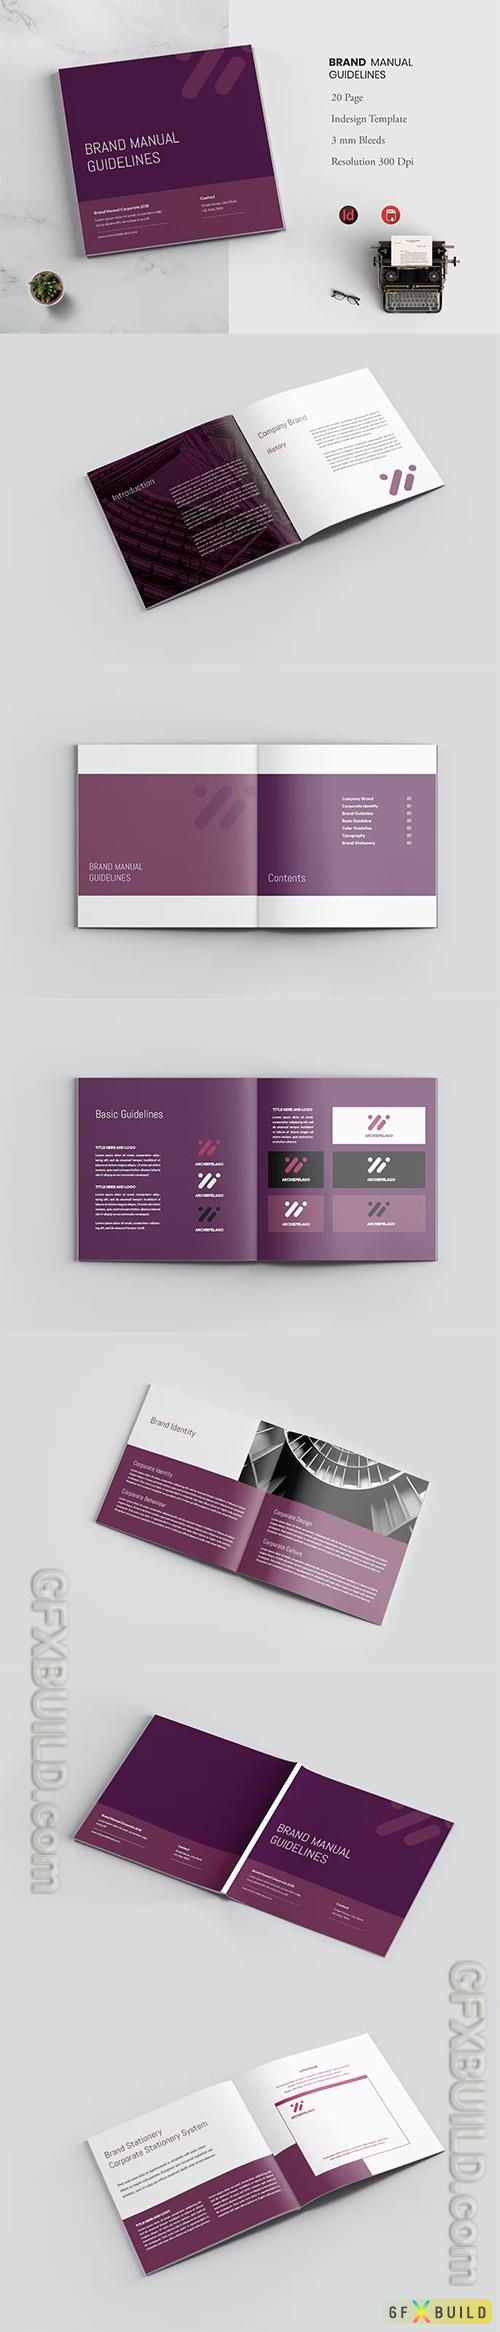 Guidelines Brand Manual